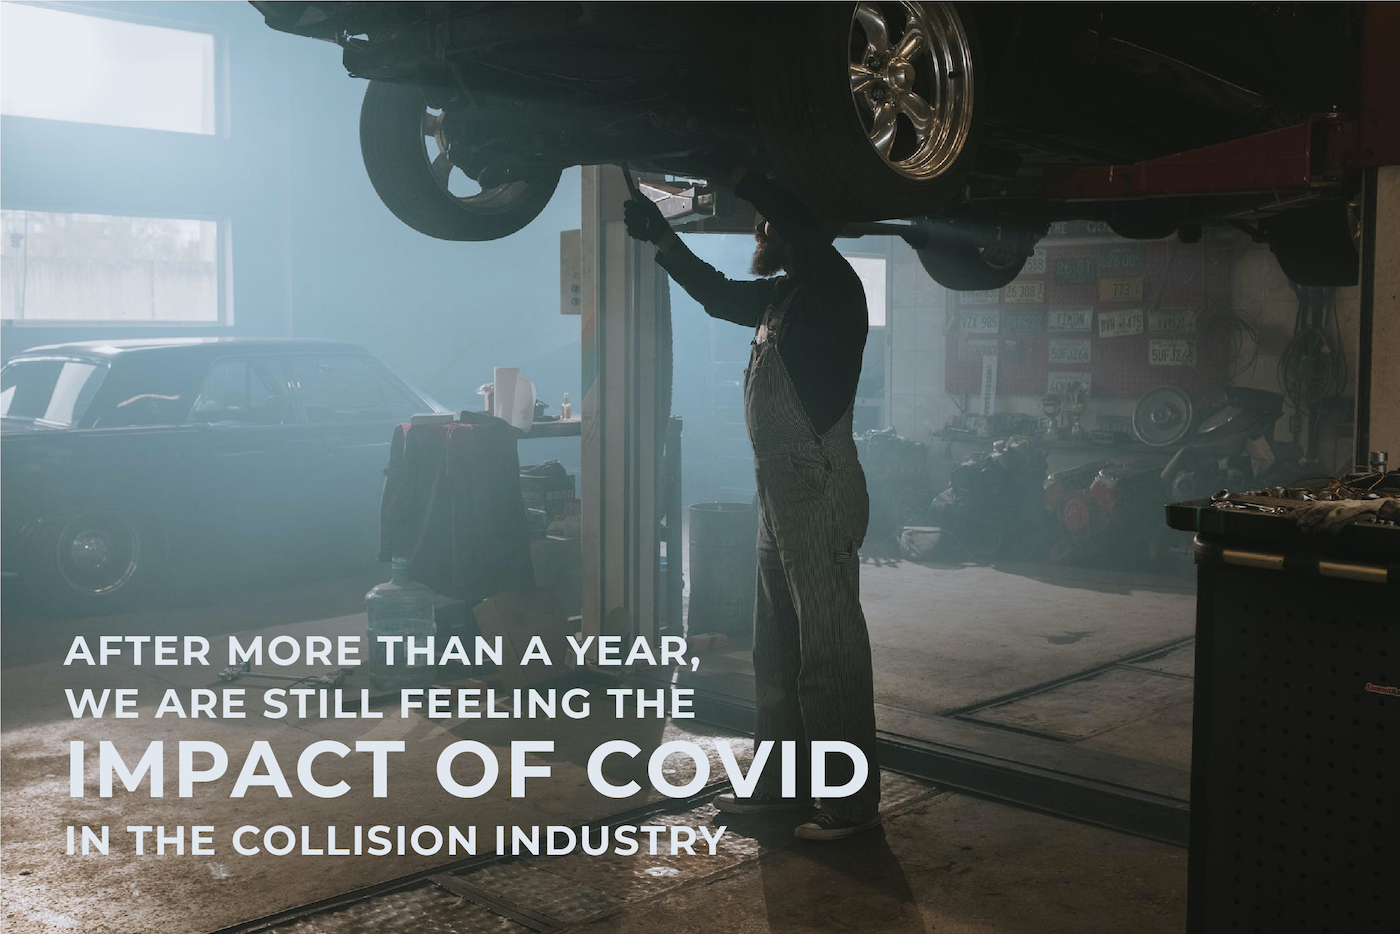 The Impact of COVID in the Collision Industry